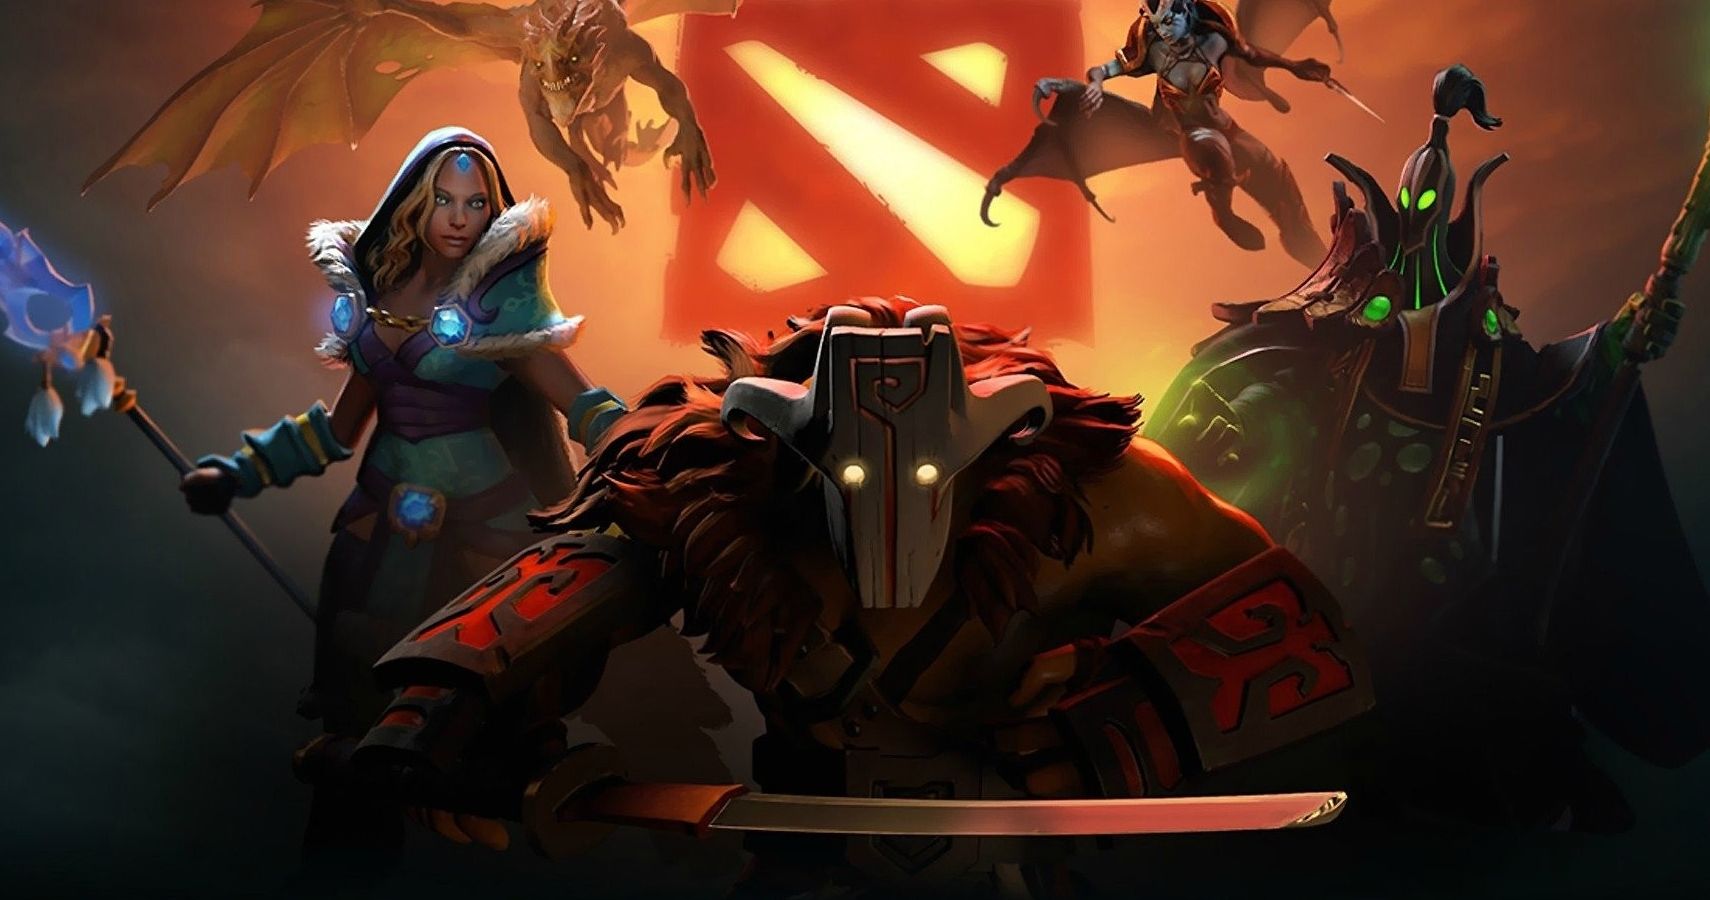 What Valve Can Do To Keep Players Interested In Dota 2